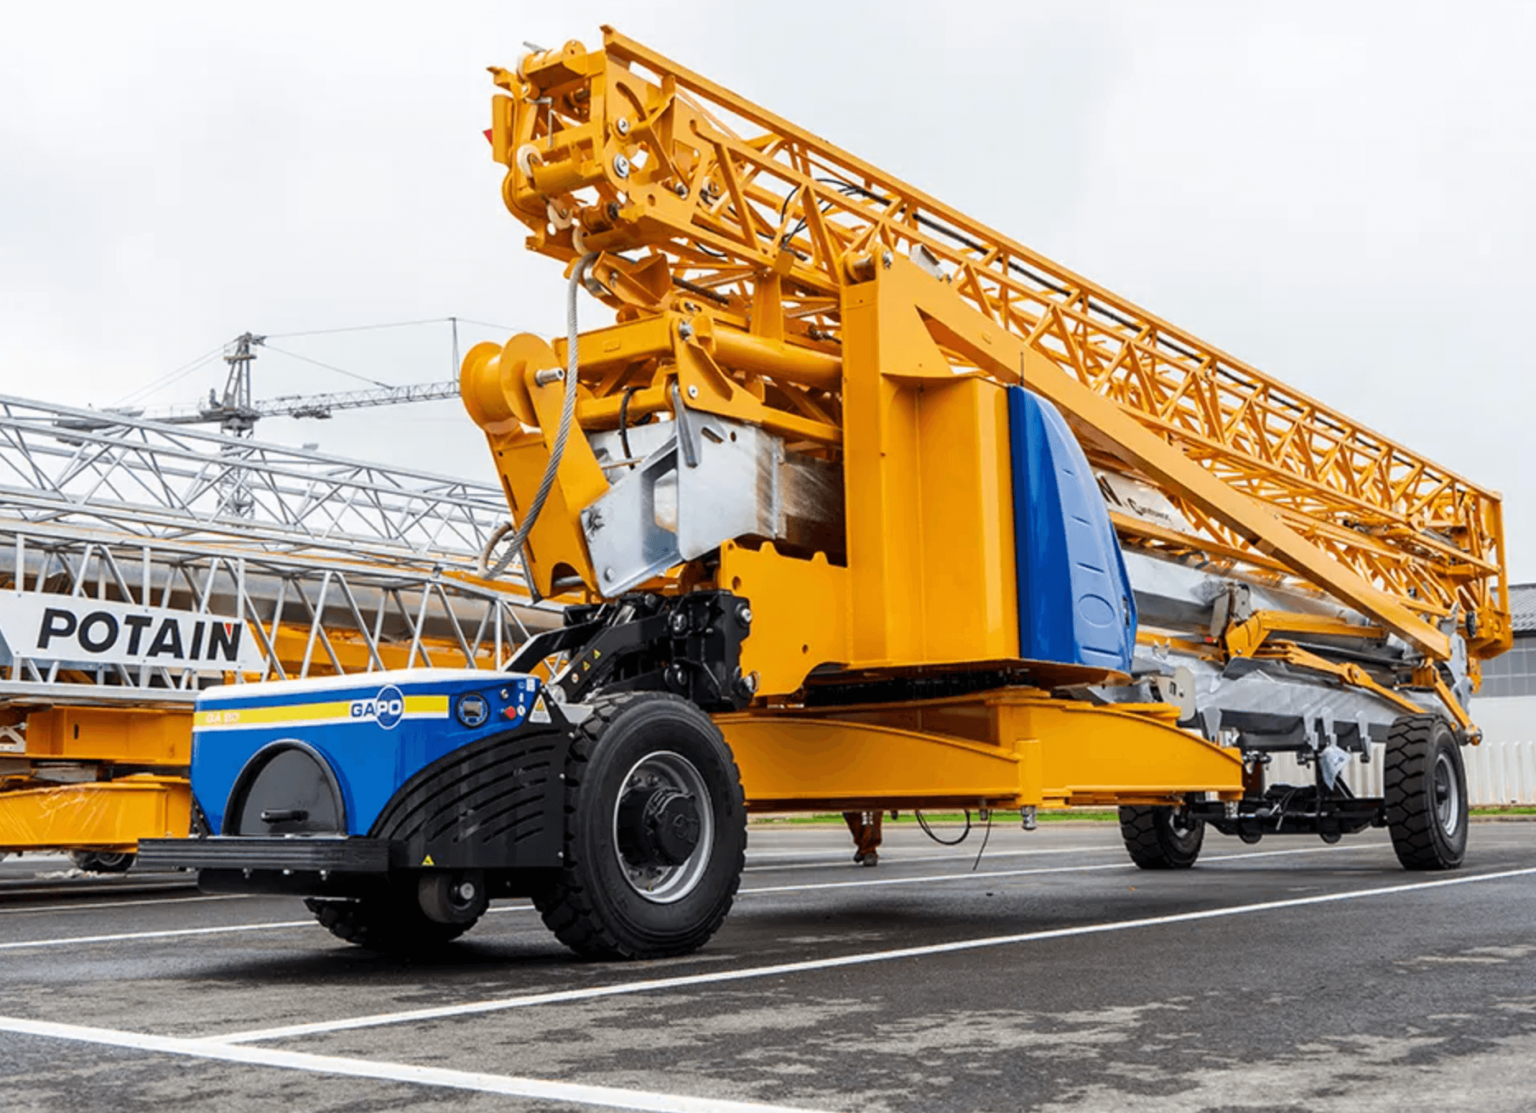 GAPO Crane Hire For Narrow Spaces North Tyneside North Shields